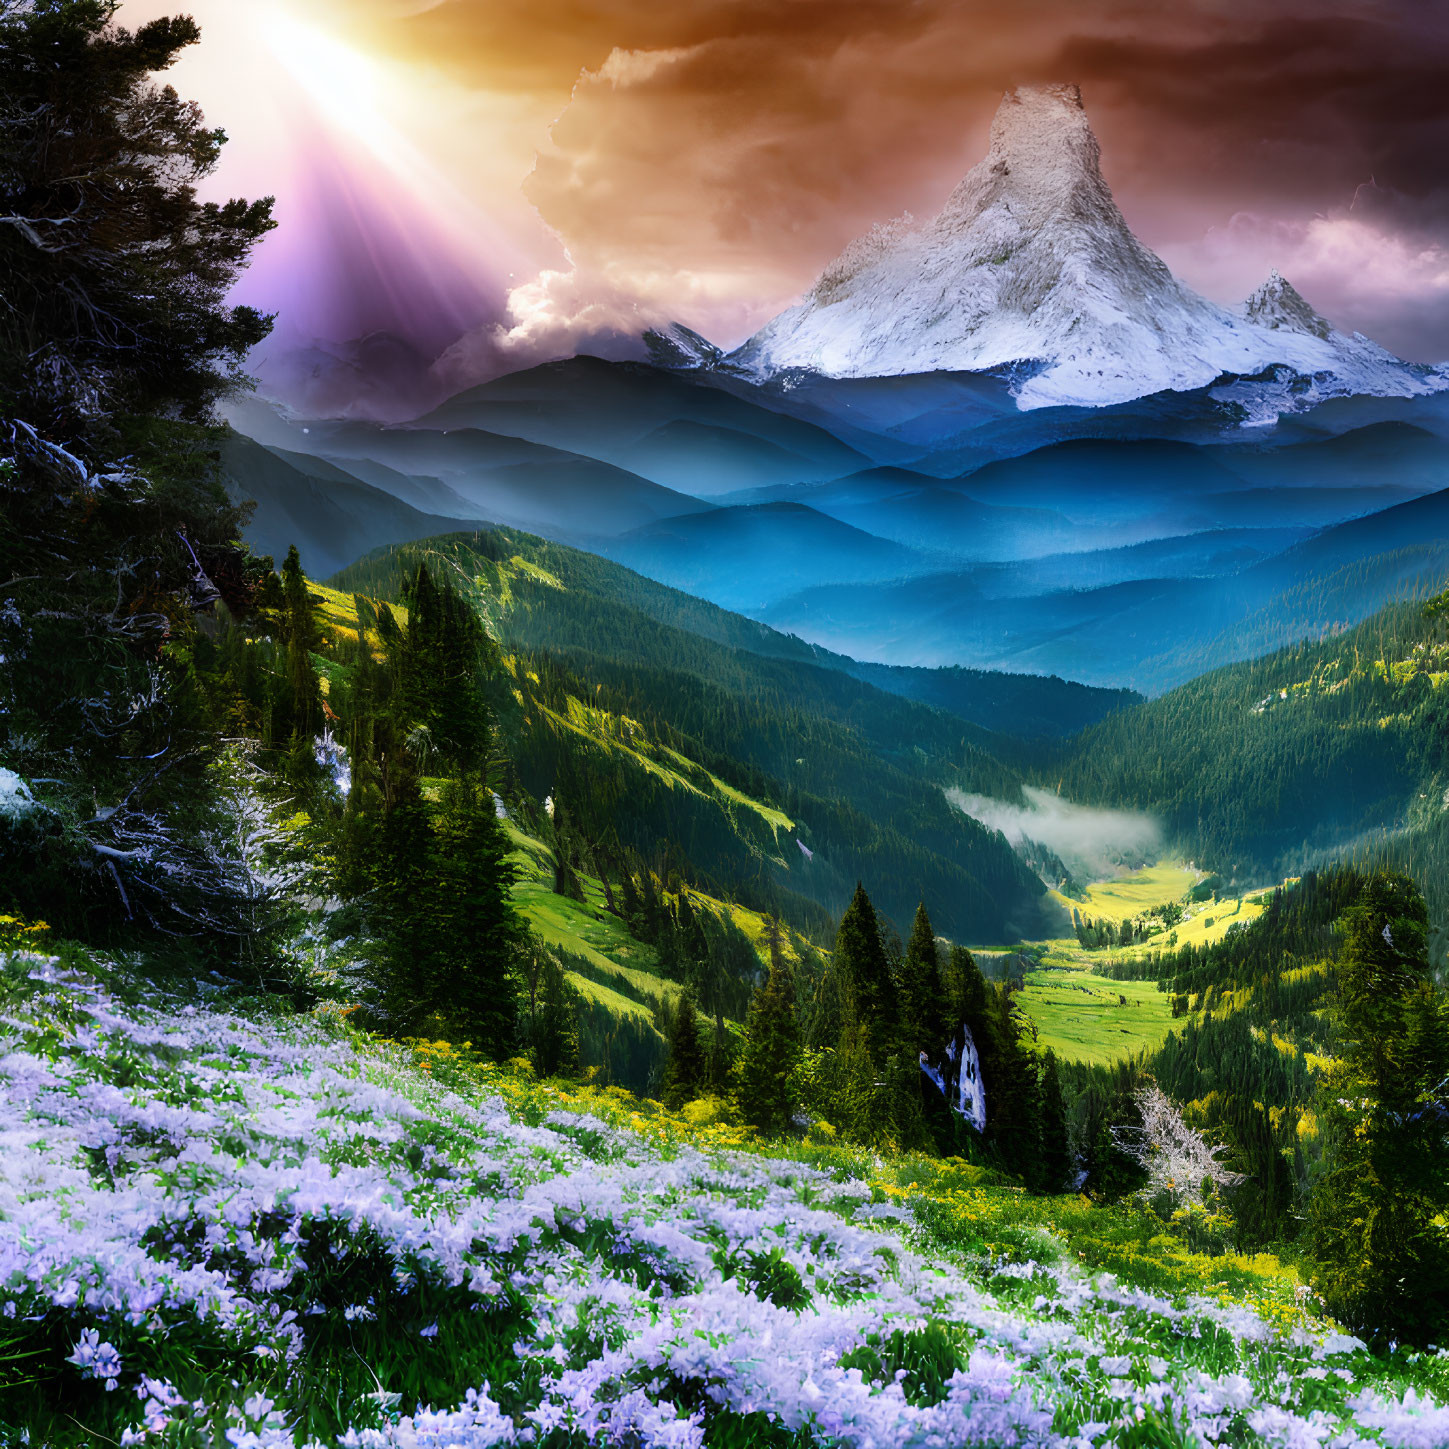 Scenic mountain landscape with snowy peak, green hills, flowers, and sunrise.